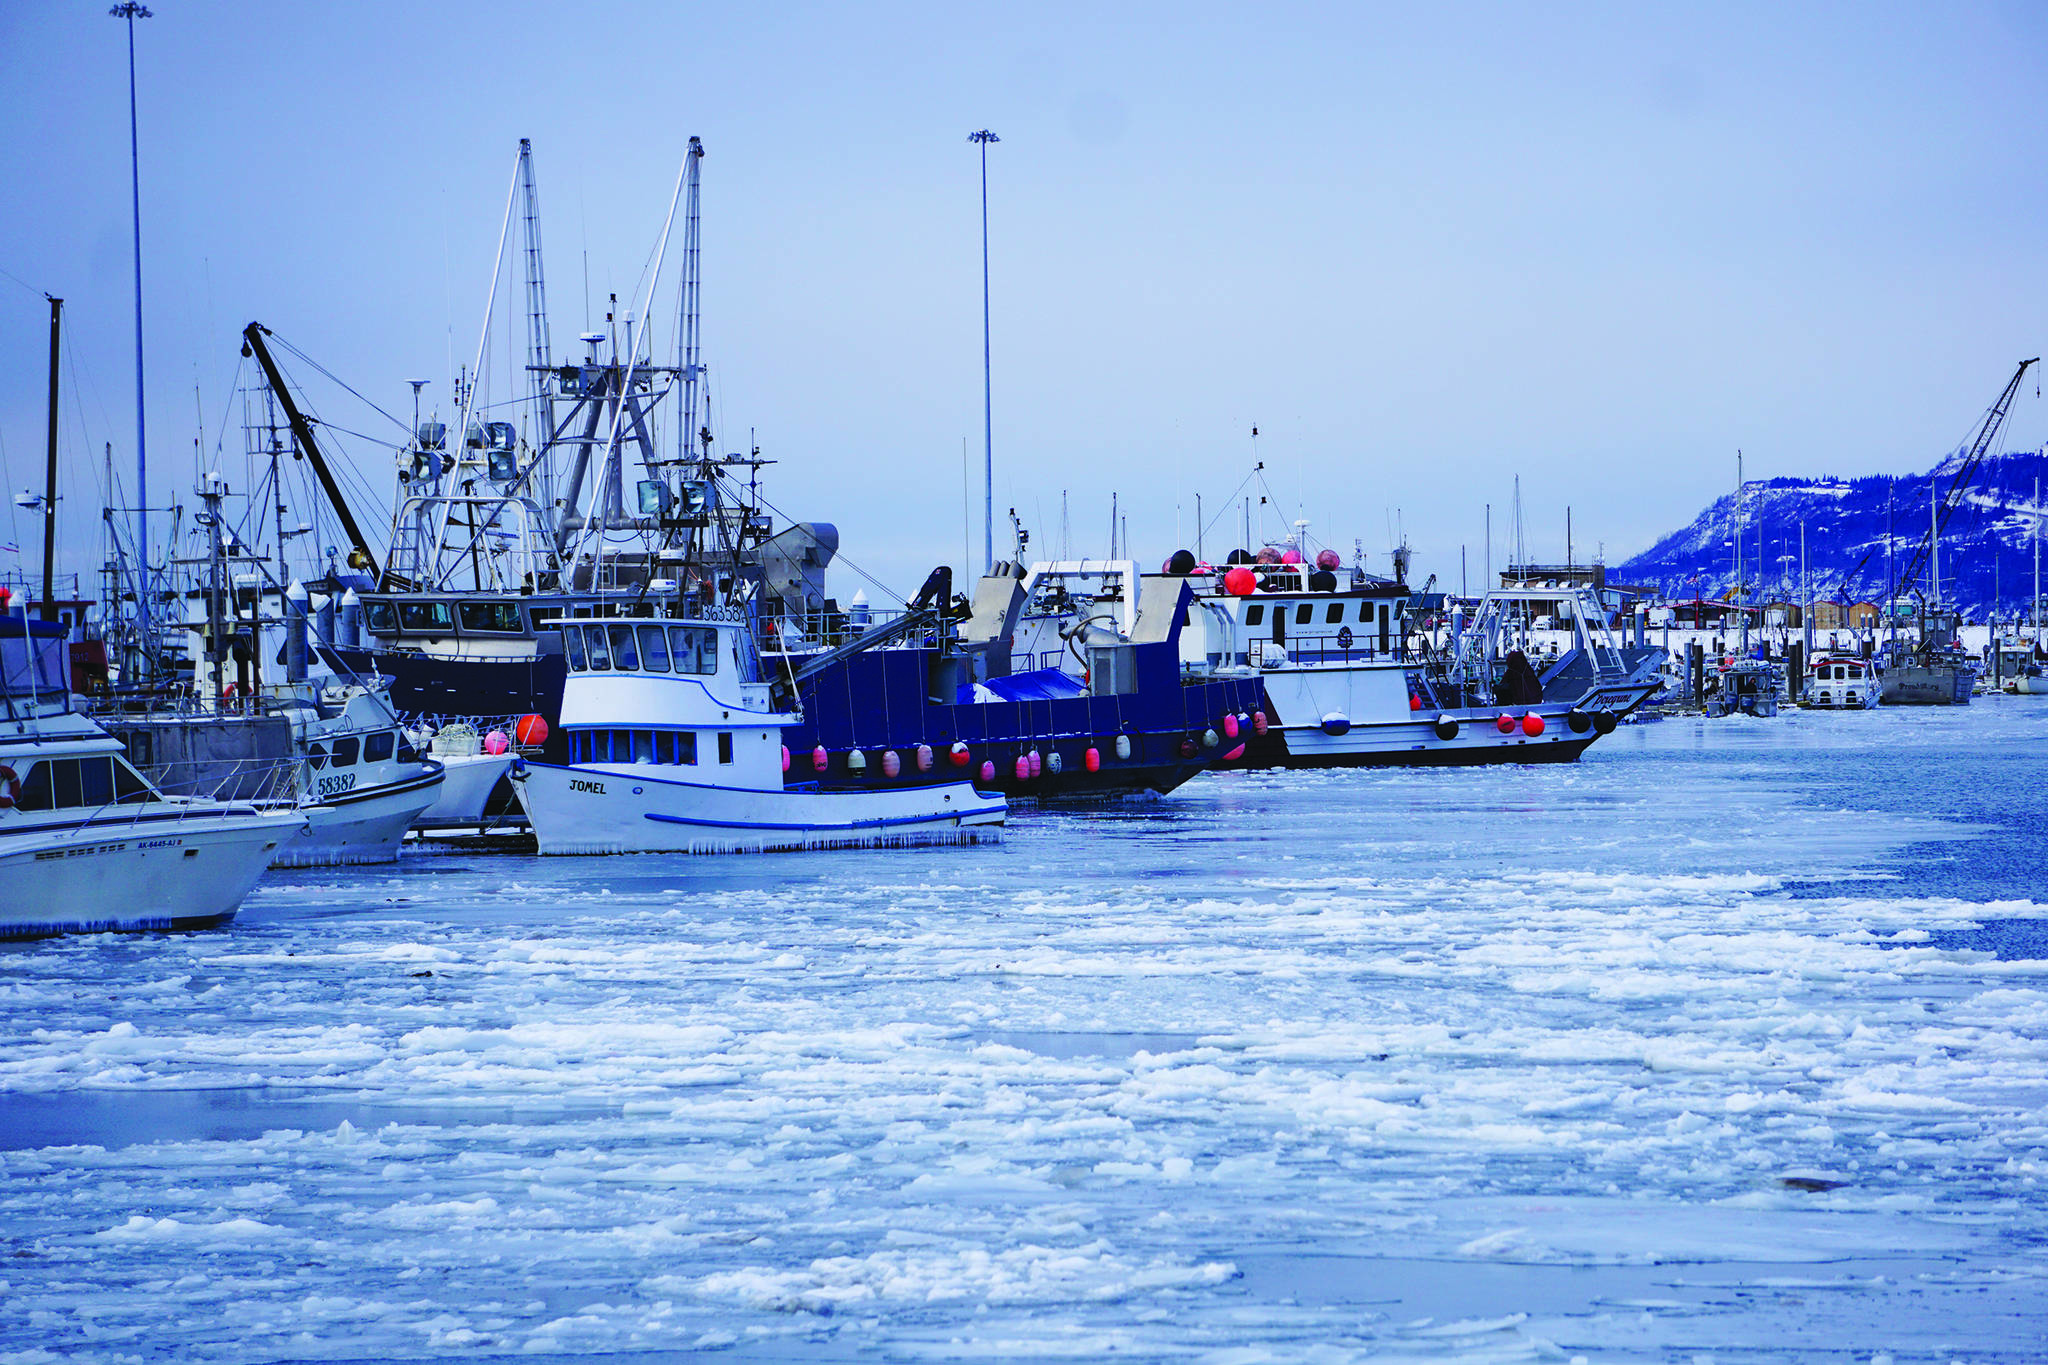 Ice chokes the Homer Harbor on Jan. 9, 2020 in Homer, Alaska. North Pacific Fishery Management Council is scheduled to take final action on a fishery management plan for commercial fishing in Upper Cook Inlet this week. (Photo by Michael Armstrong/Homer News)